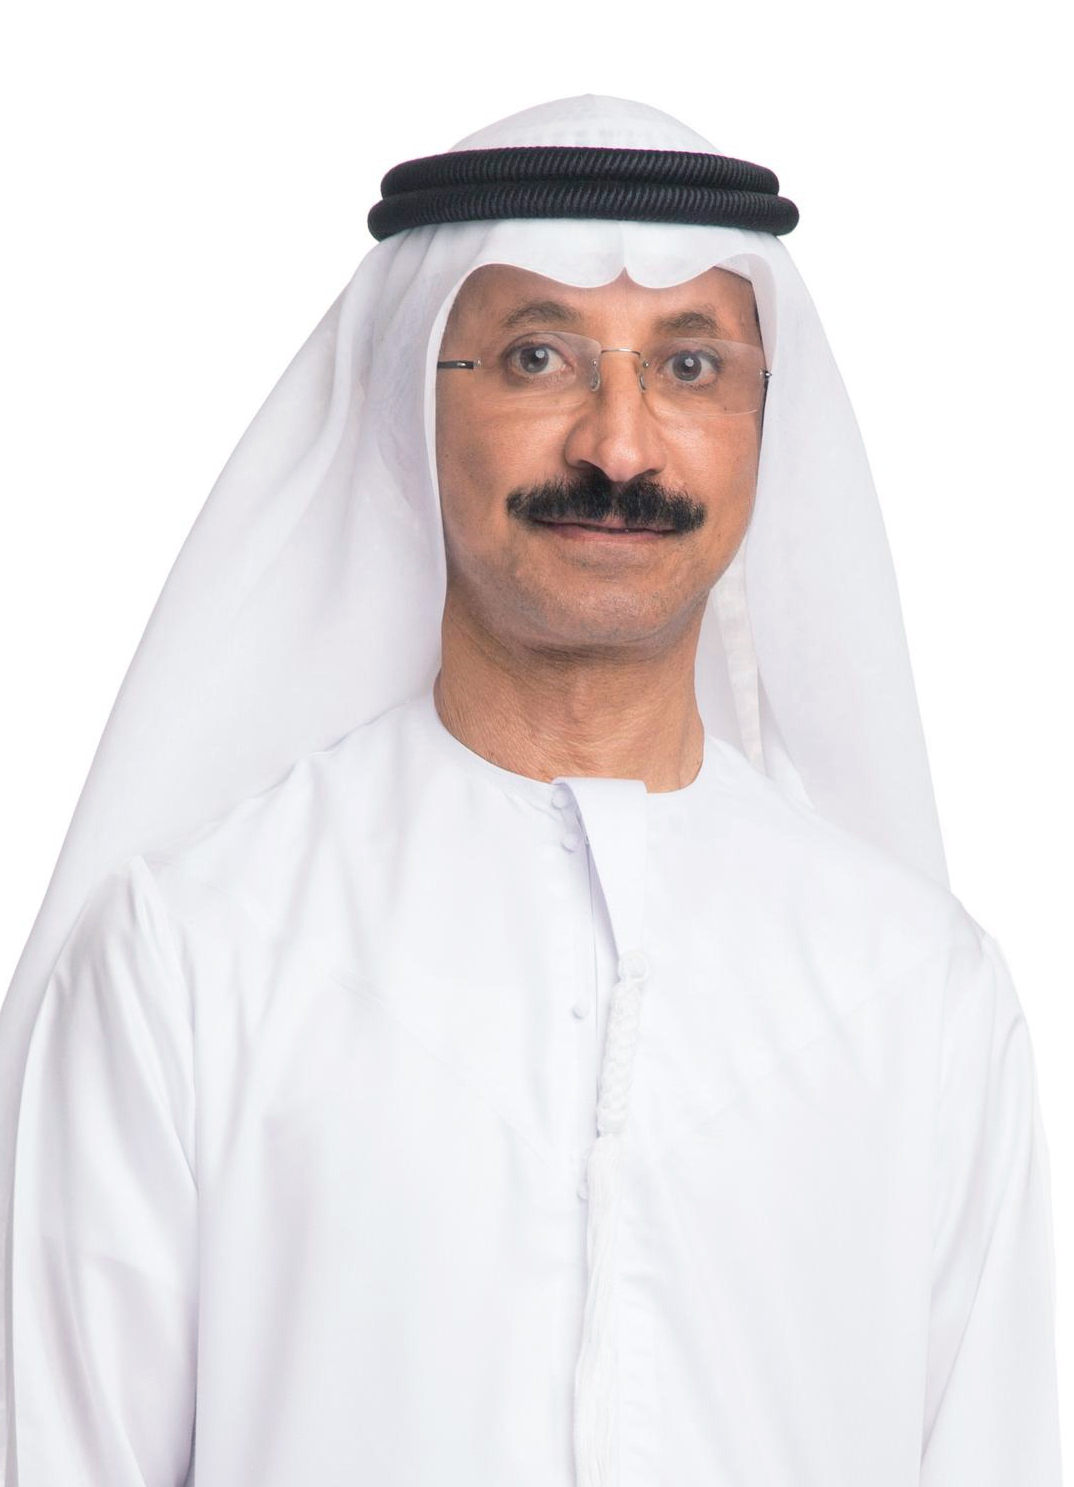 The statement of His Excellency Sultan Ahmed bin Sulayem, Chairman of the Ports, Customs and Free Zone Corporation, on the occasion of the 16th anniversary of His Highness Sheikh Mohammed bin Rashid Al Maktoum